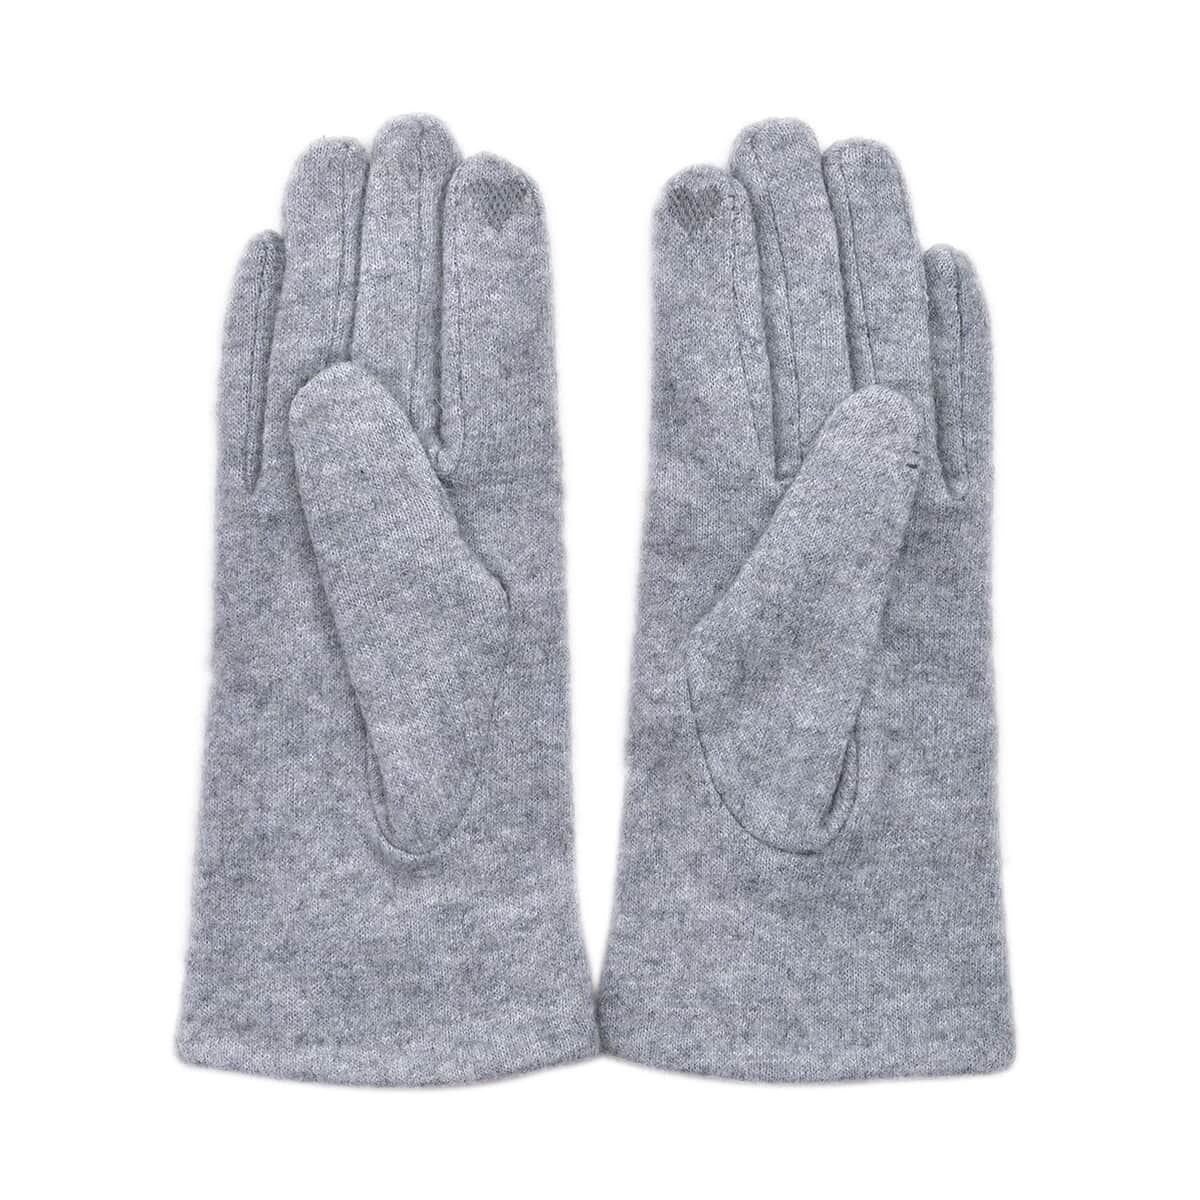 Grey Cashmere Warm Gloves with Bowknot and Equipped Touch Screen Friendly (9.2"x3.54") image number 5